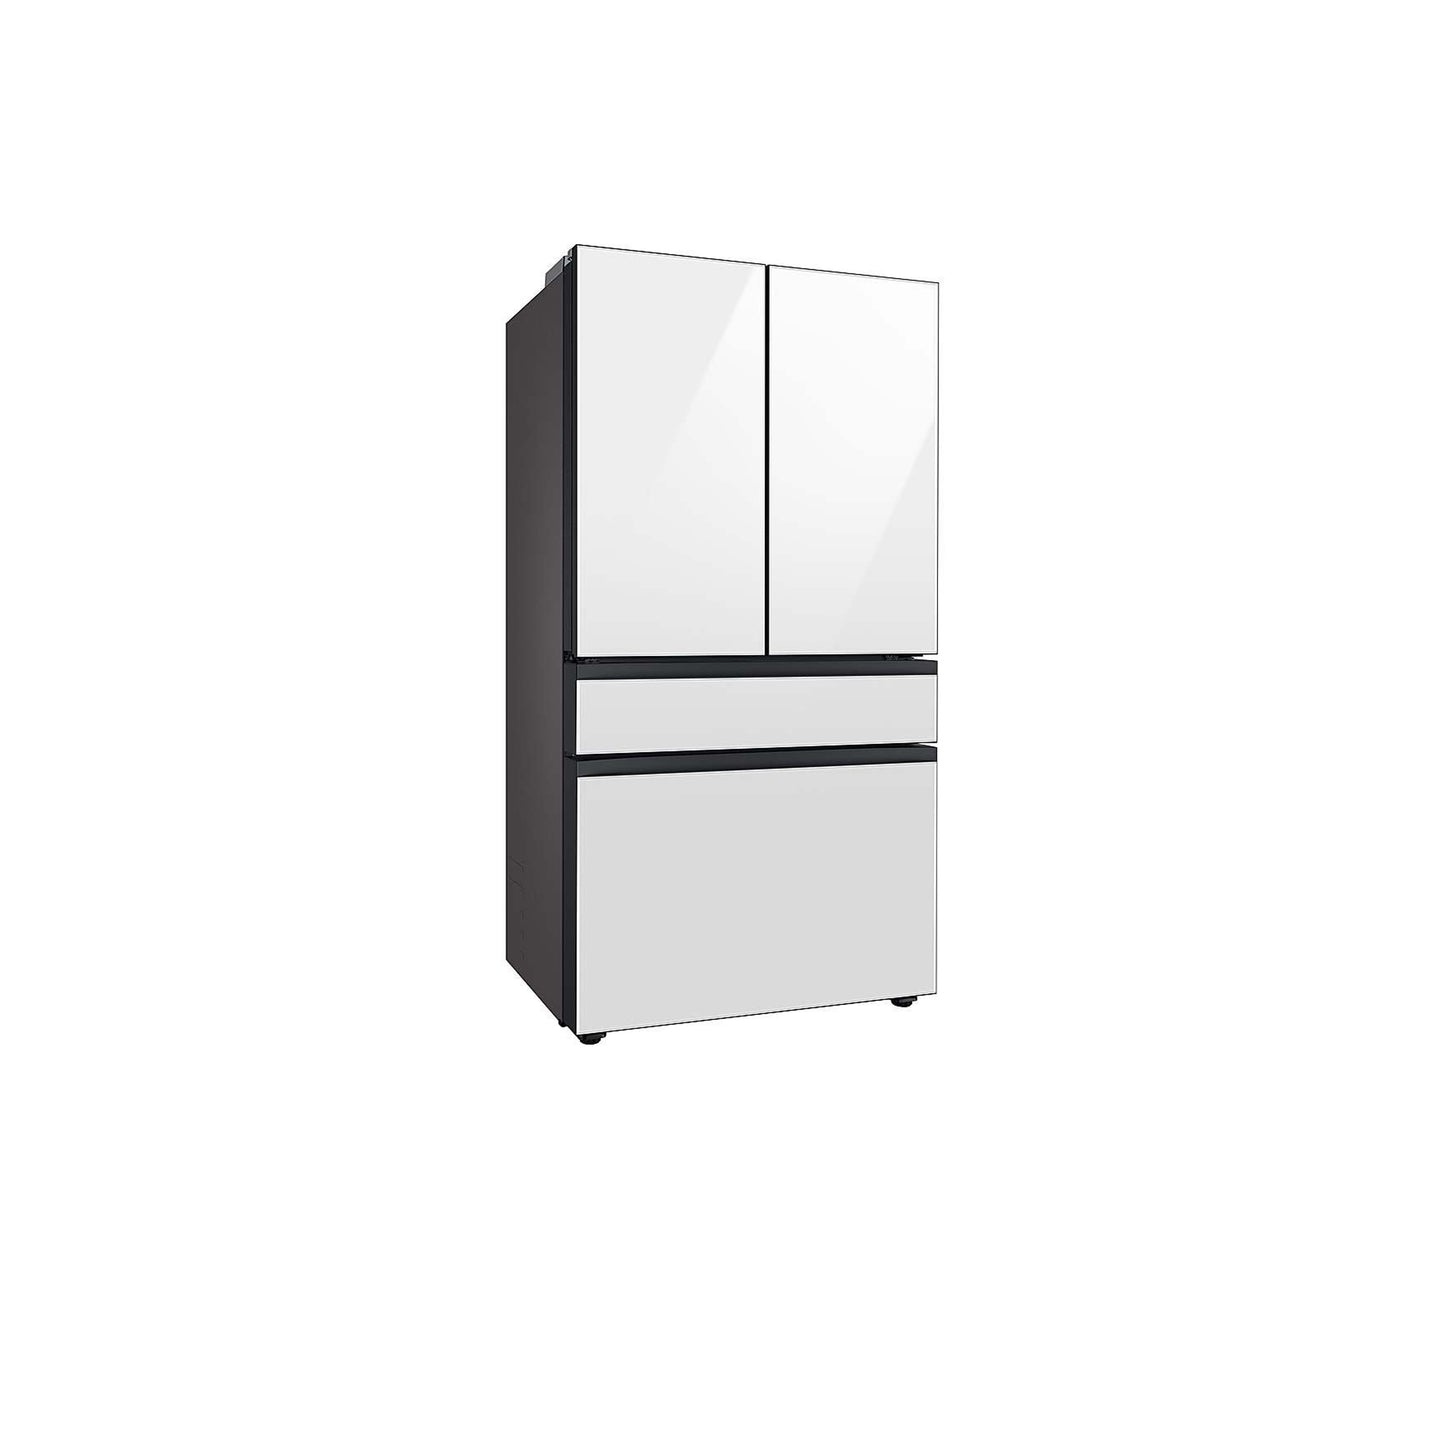 Bespoke 4-Door French Door Refrigerator (23 cu. ft.) with Beverage Center™ in Morning Blue Glass Top Panels and White Glass Middle and Bottom Panels.